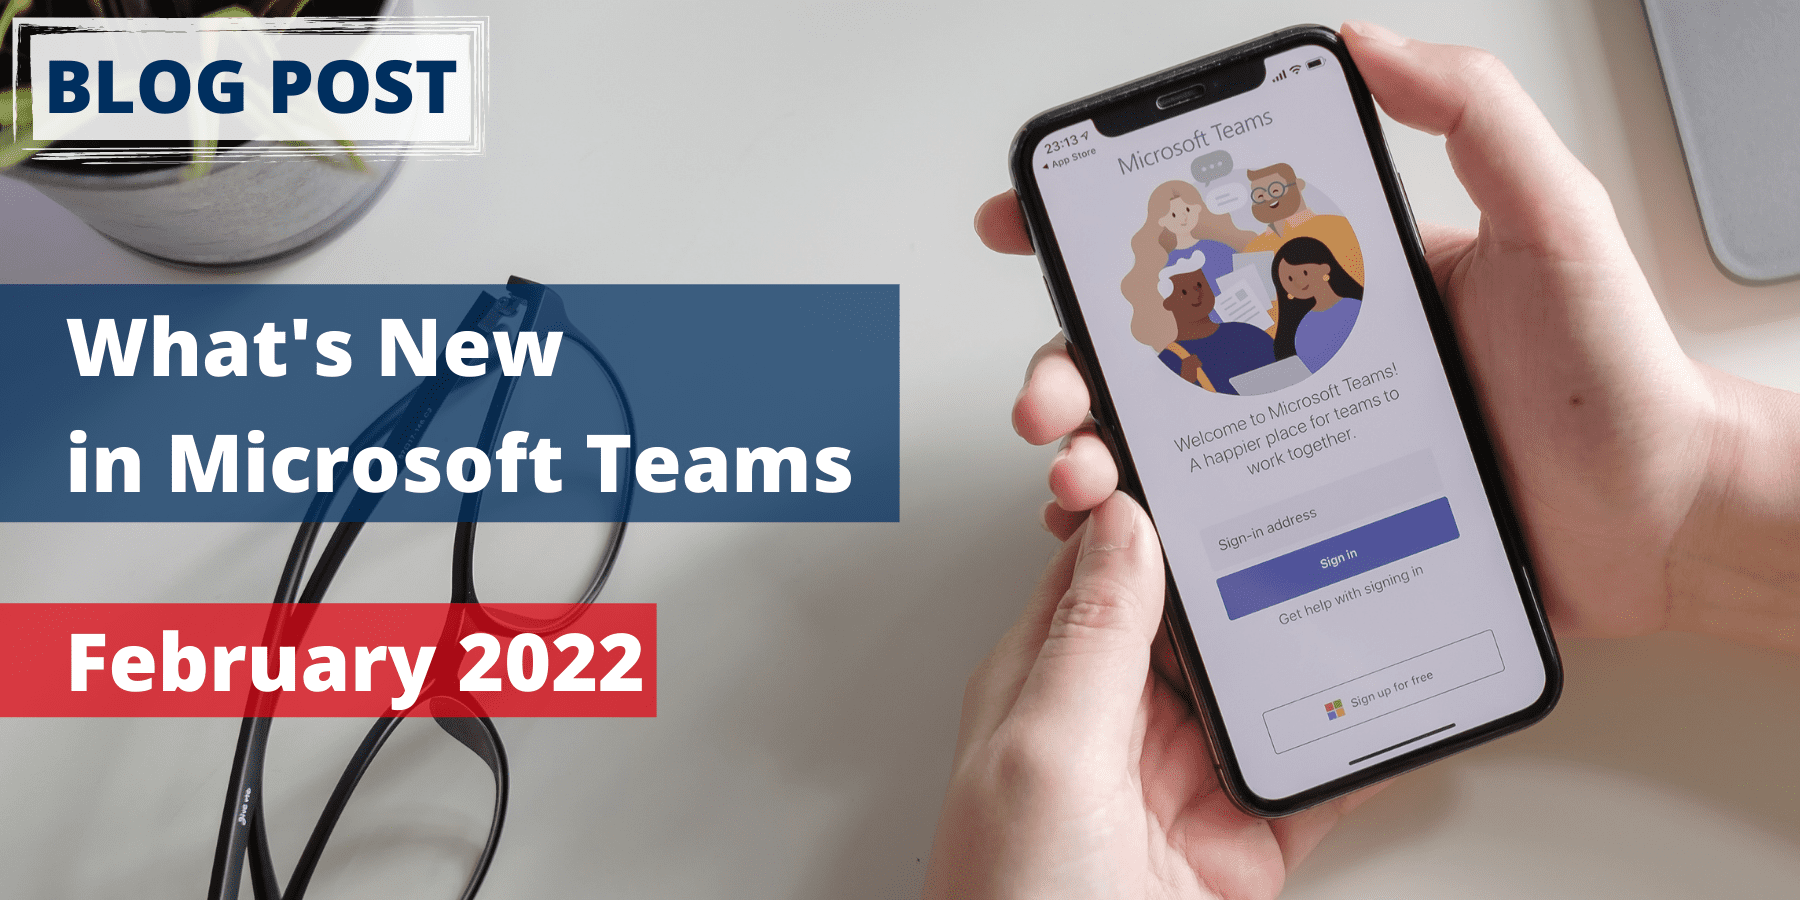 New in Teams February 2022